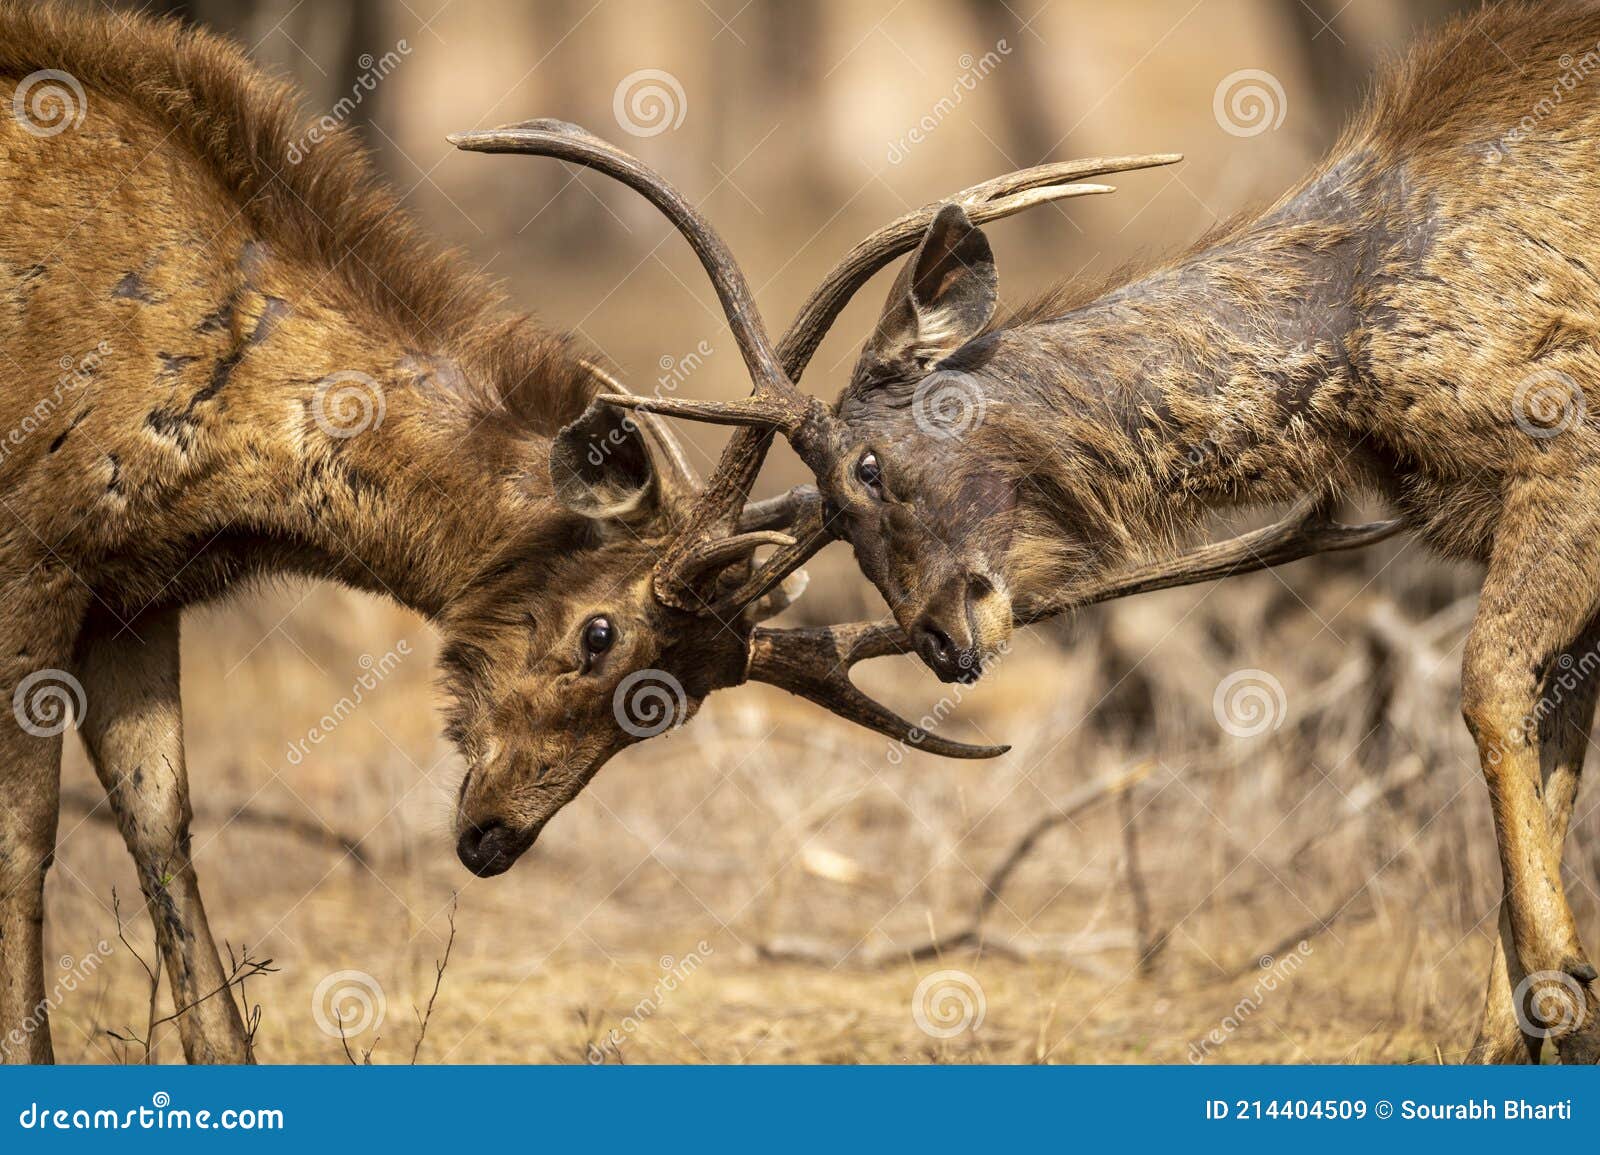 two angry male sambar deer in action fighting with their big long horns showing dominance at ranthambore national park or tiger